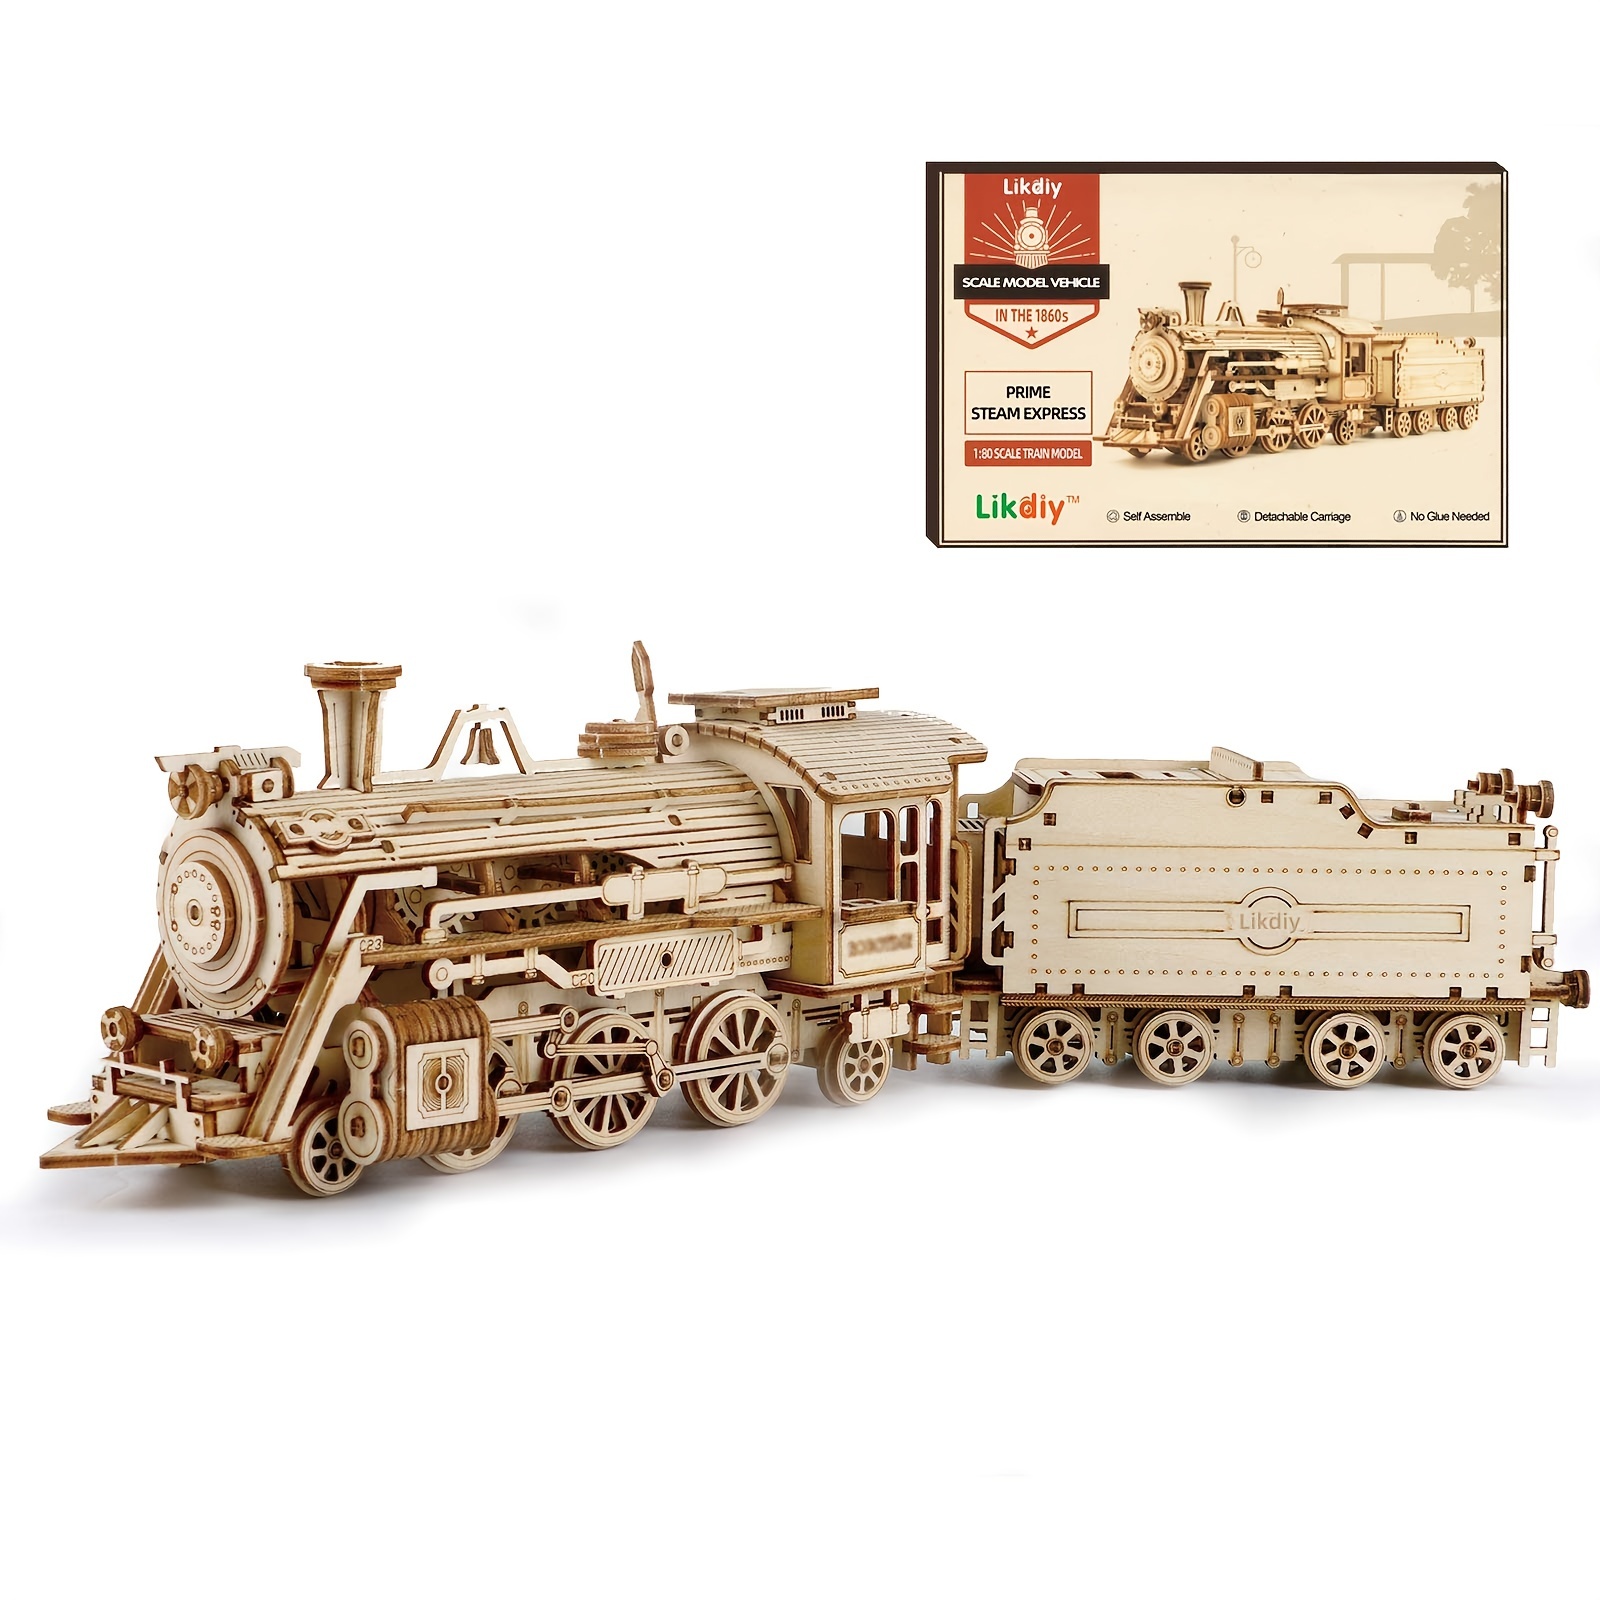 ROKR Model Car Kits Wooden 3D Puzzles Model Building Kits for  Adults-Educational Brain Teaser Assembly Model for Adults to Build, Desk  Decor/DIY